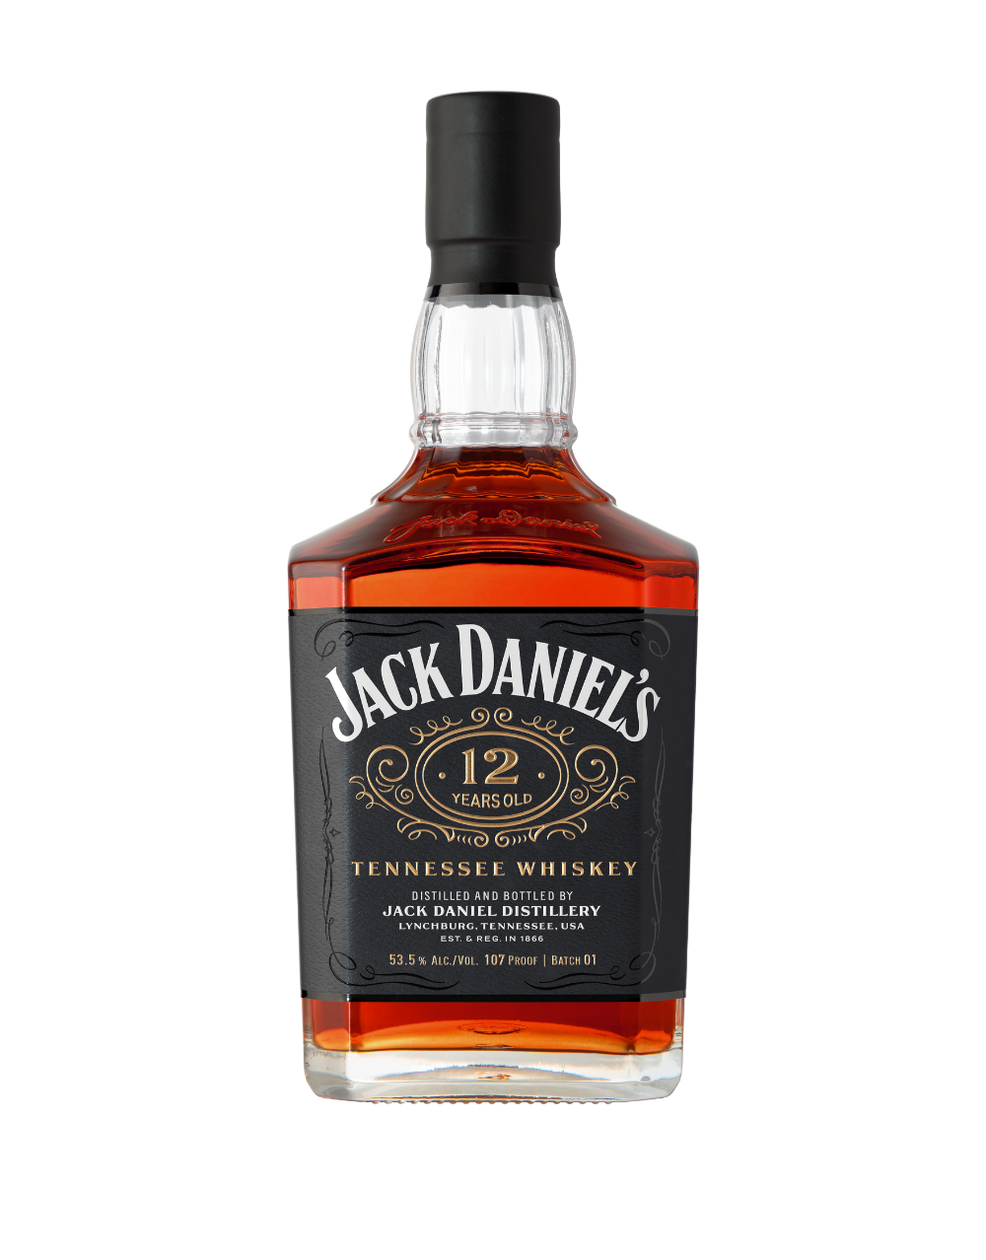 Jack Daniel's 12 Years Old Tennessee Whiskey